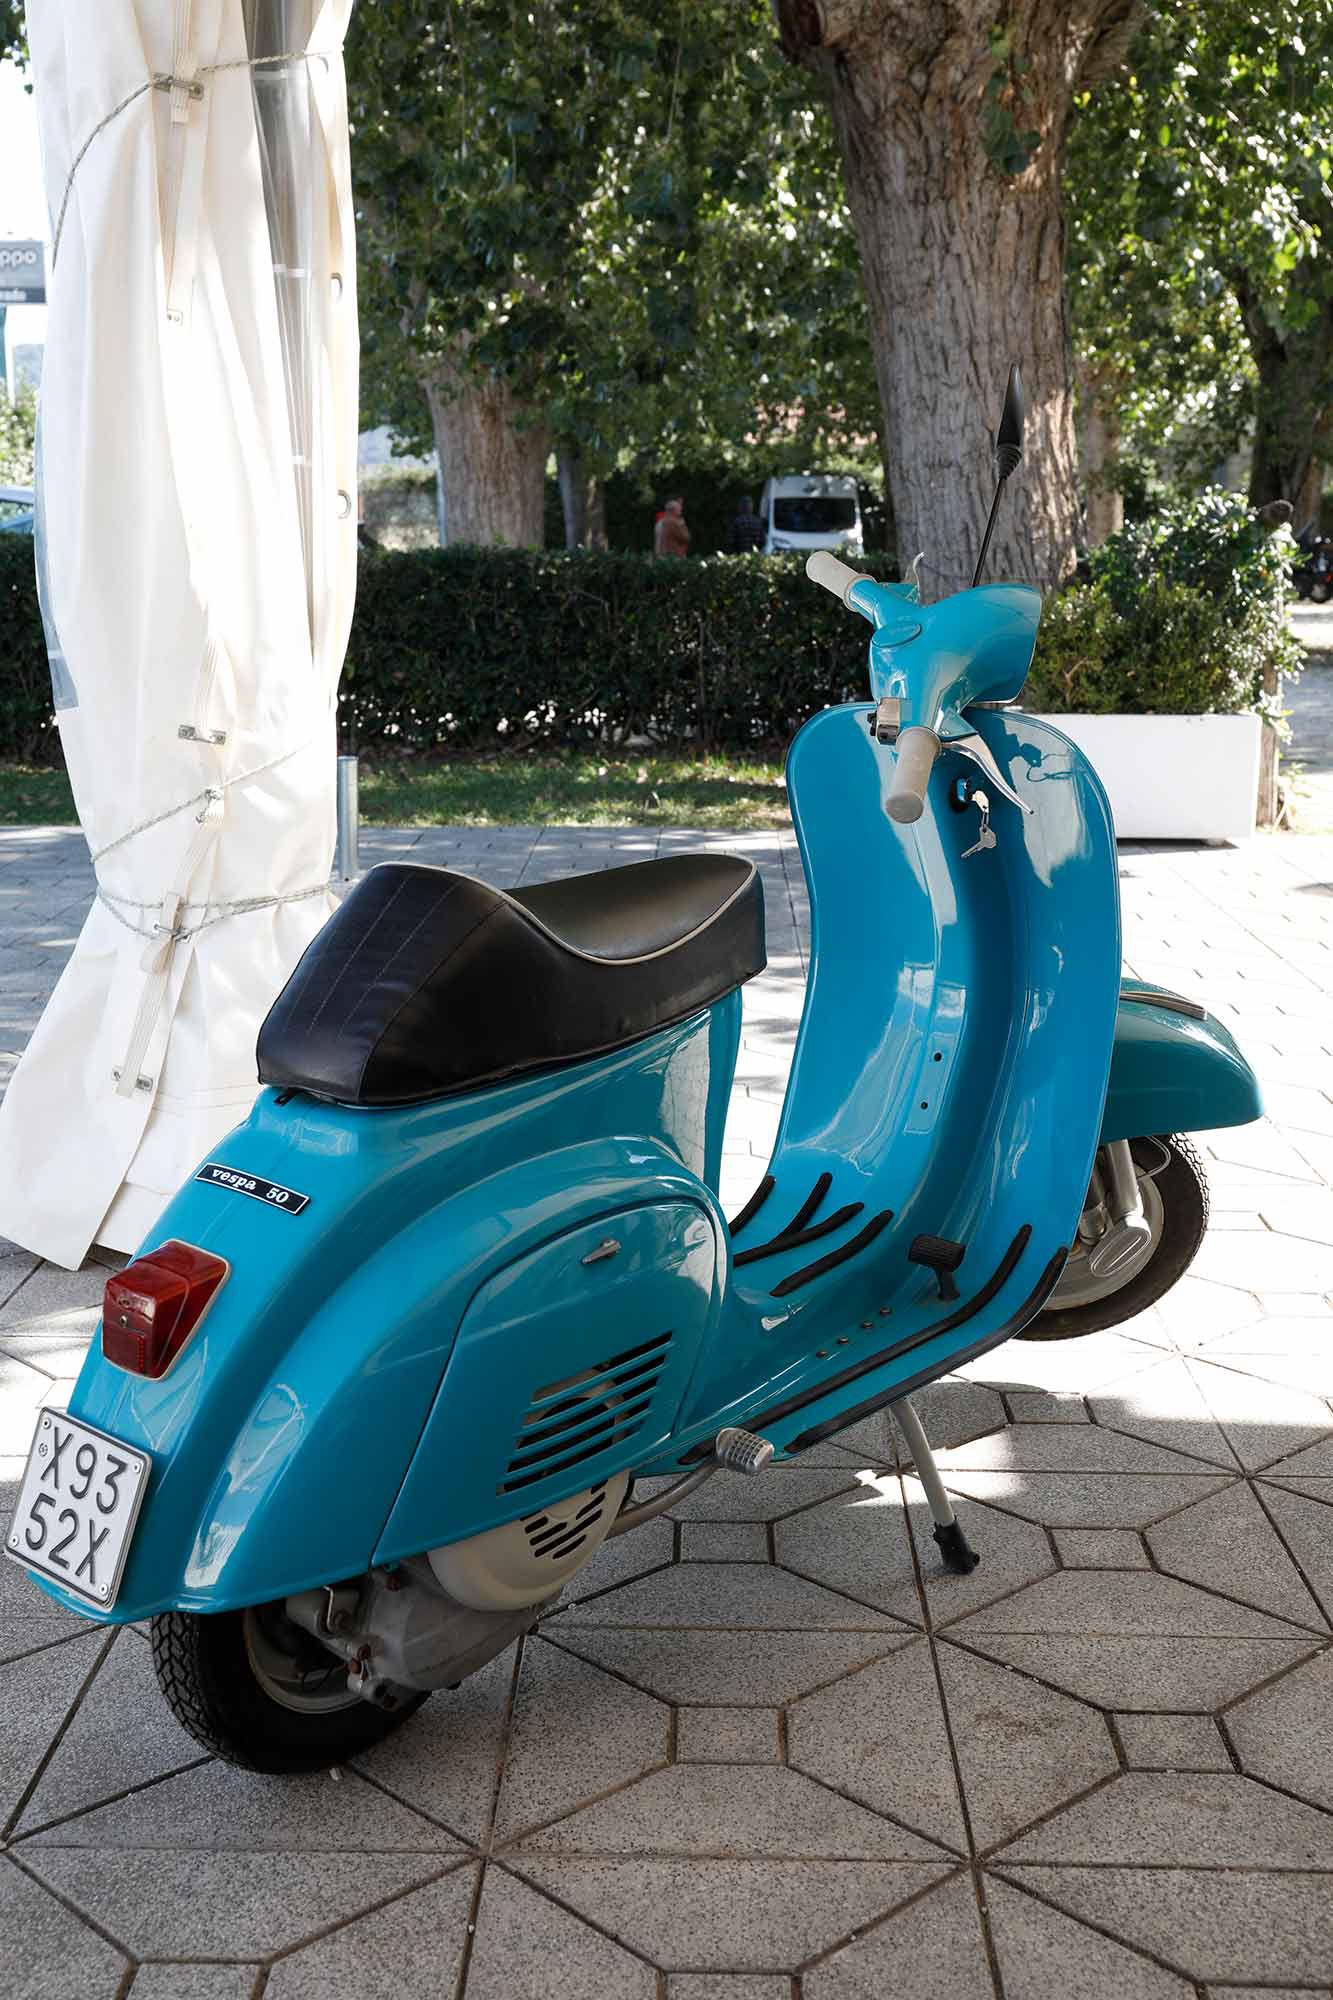 Aesthetically, Vespa hasn’t strayed too far from the original. We like its signature 1940s aerospace lines that only it offers.